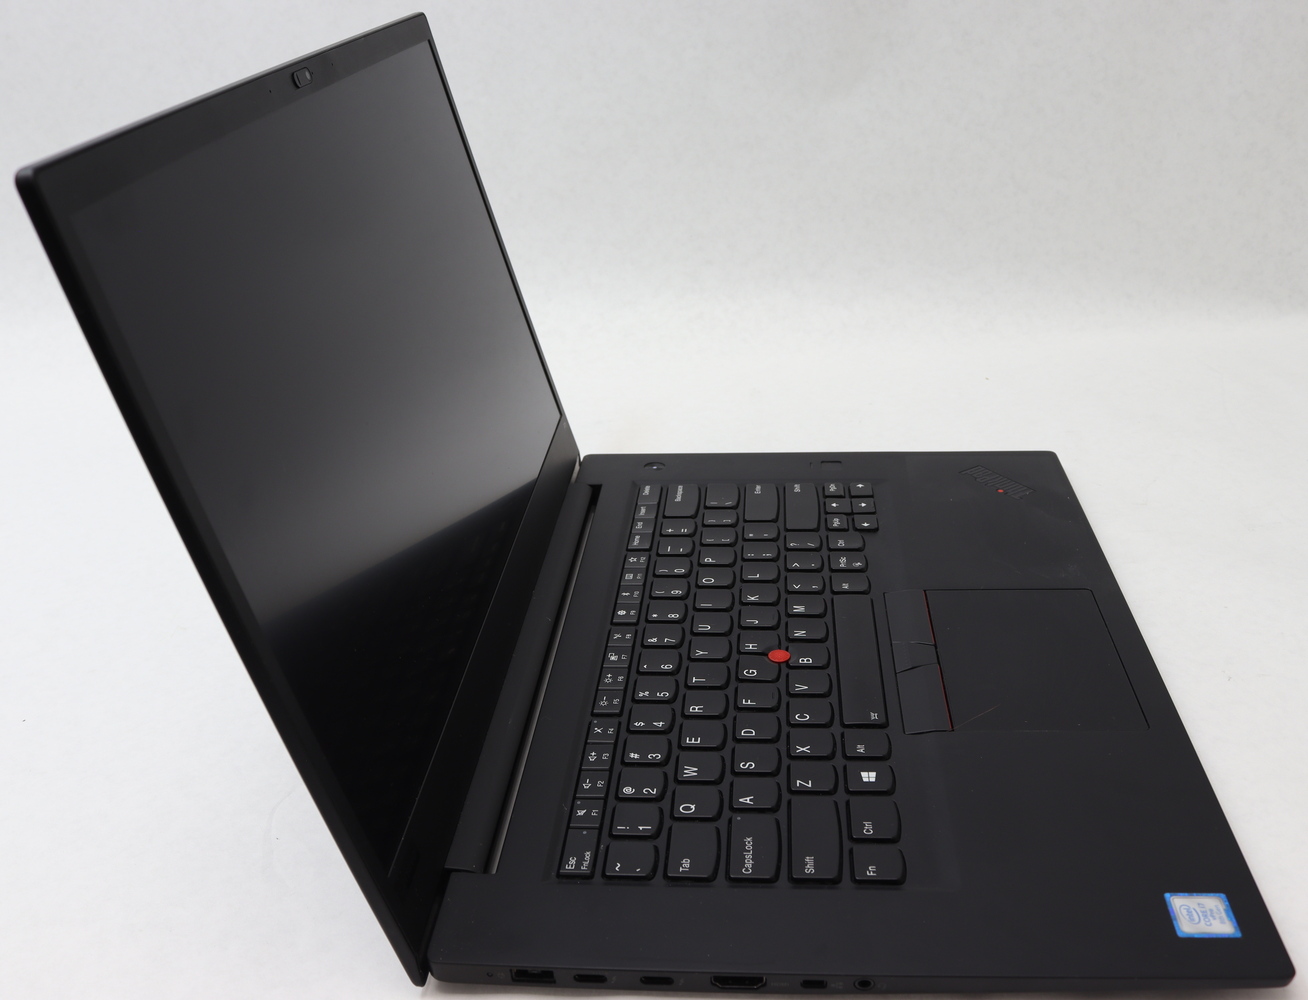 LENOVO THINKPAD P1 WINDOWS 10 PRO, 2.60GHZ, I7, 32.0GB WITH CHARGER